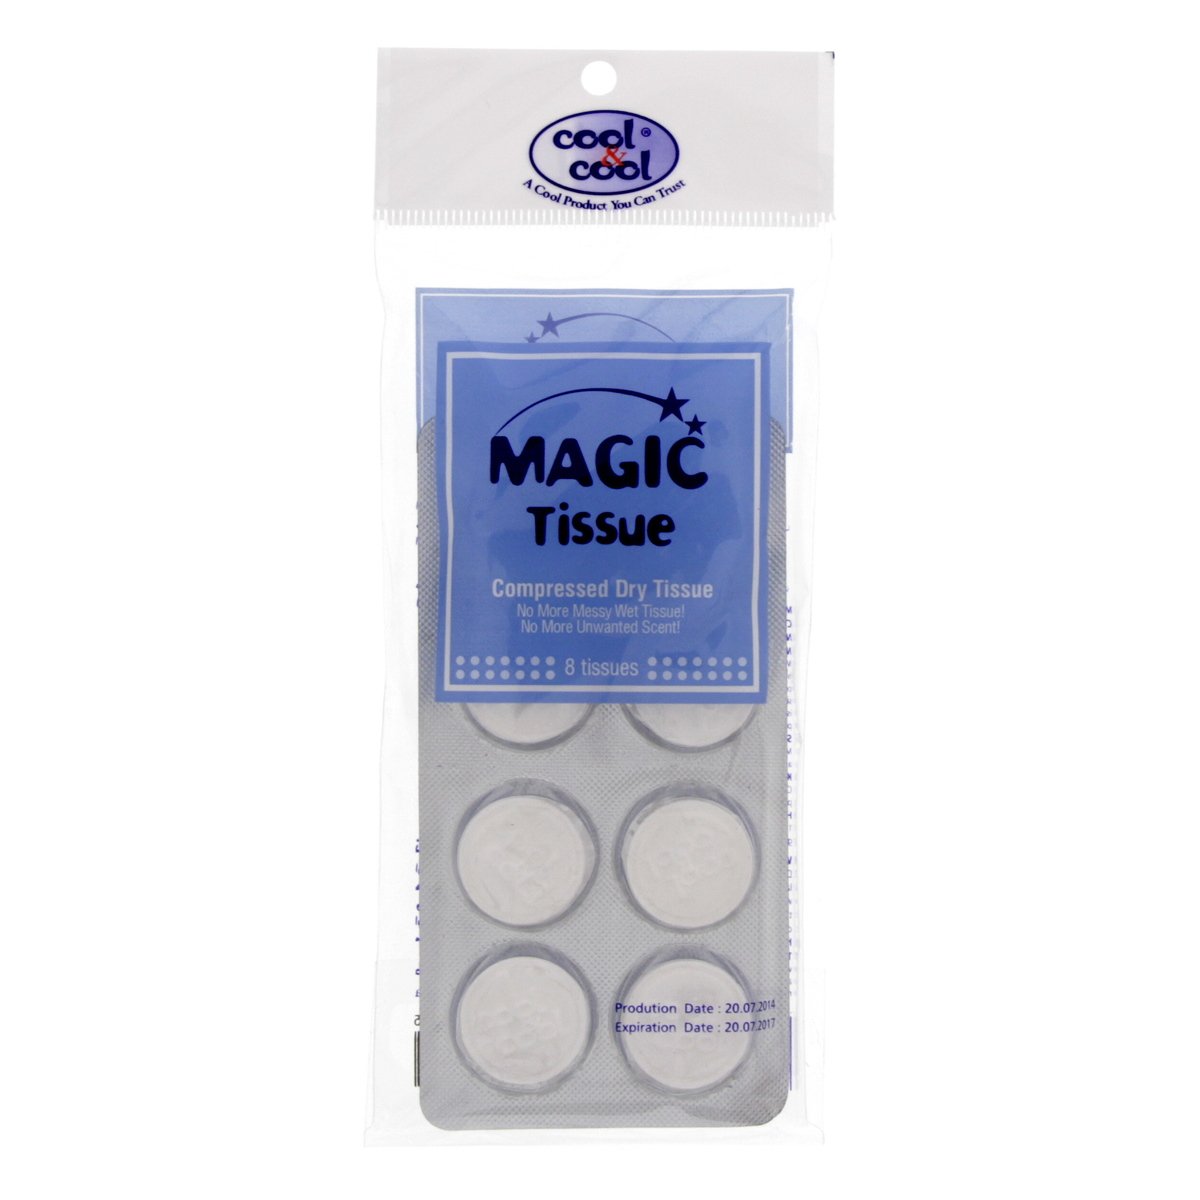 Cool & Cool Magic Tissue Compressed Dry Tissue 8's